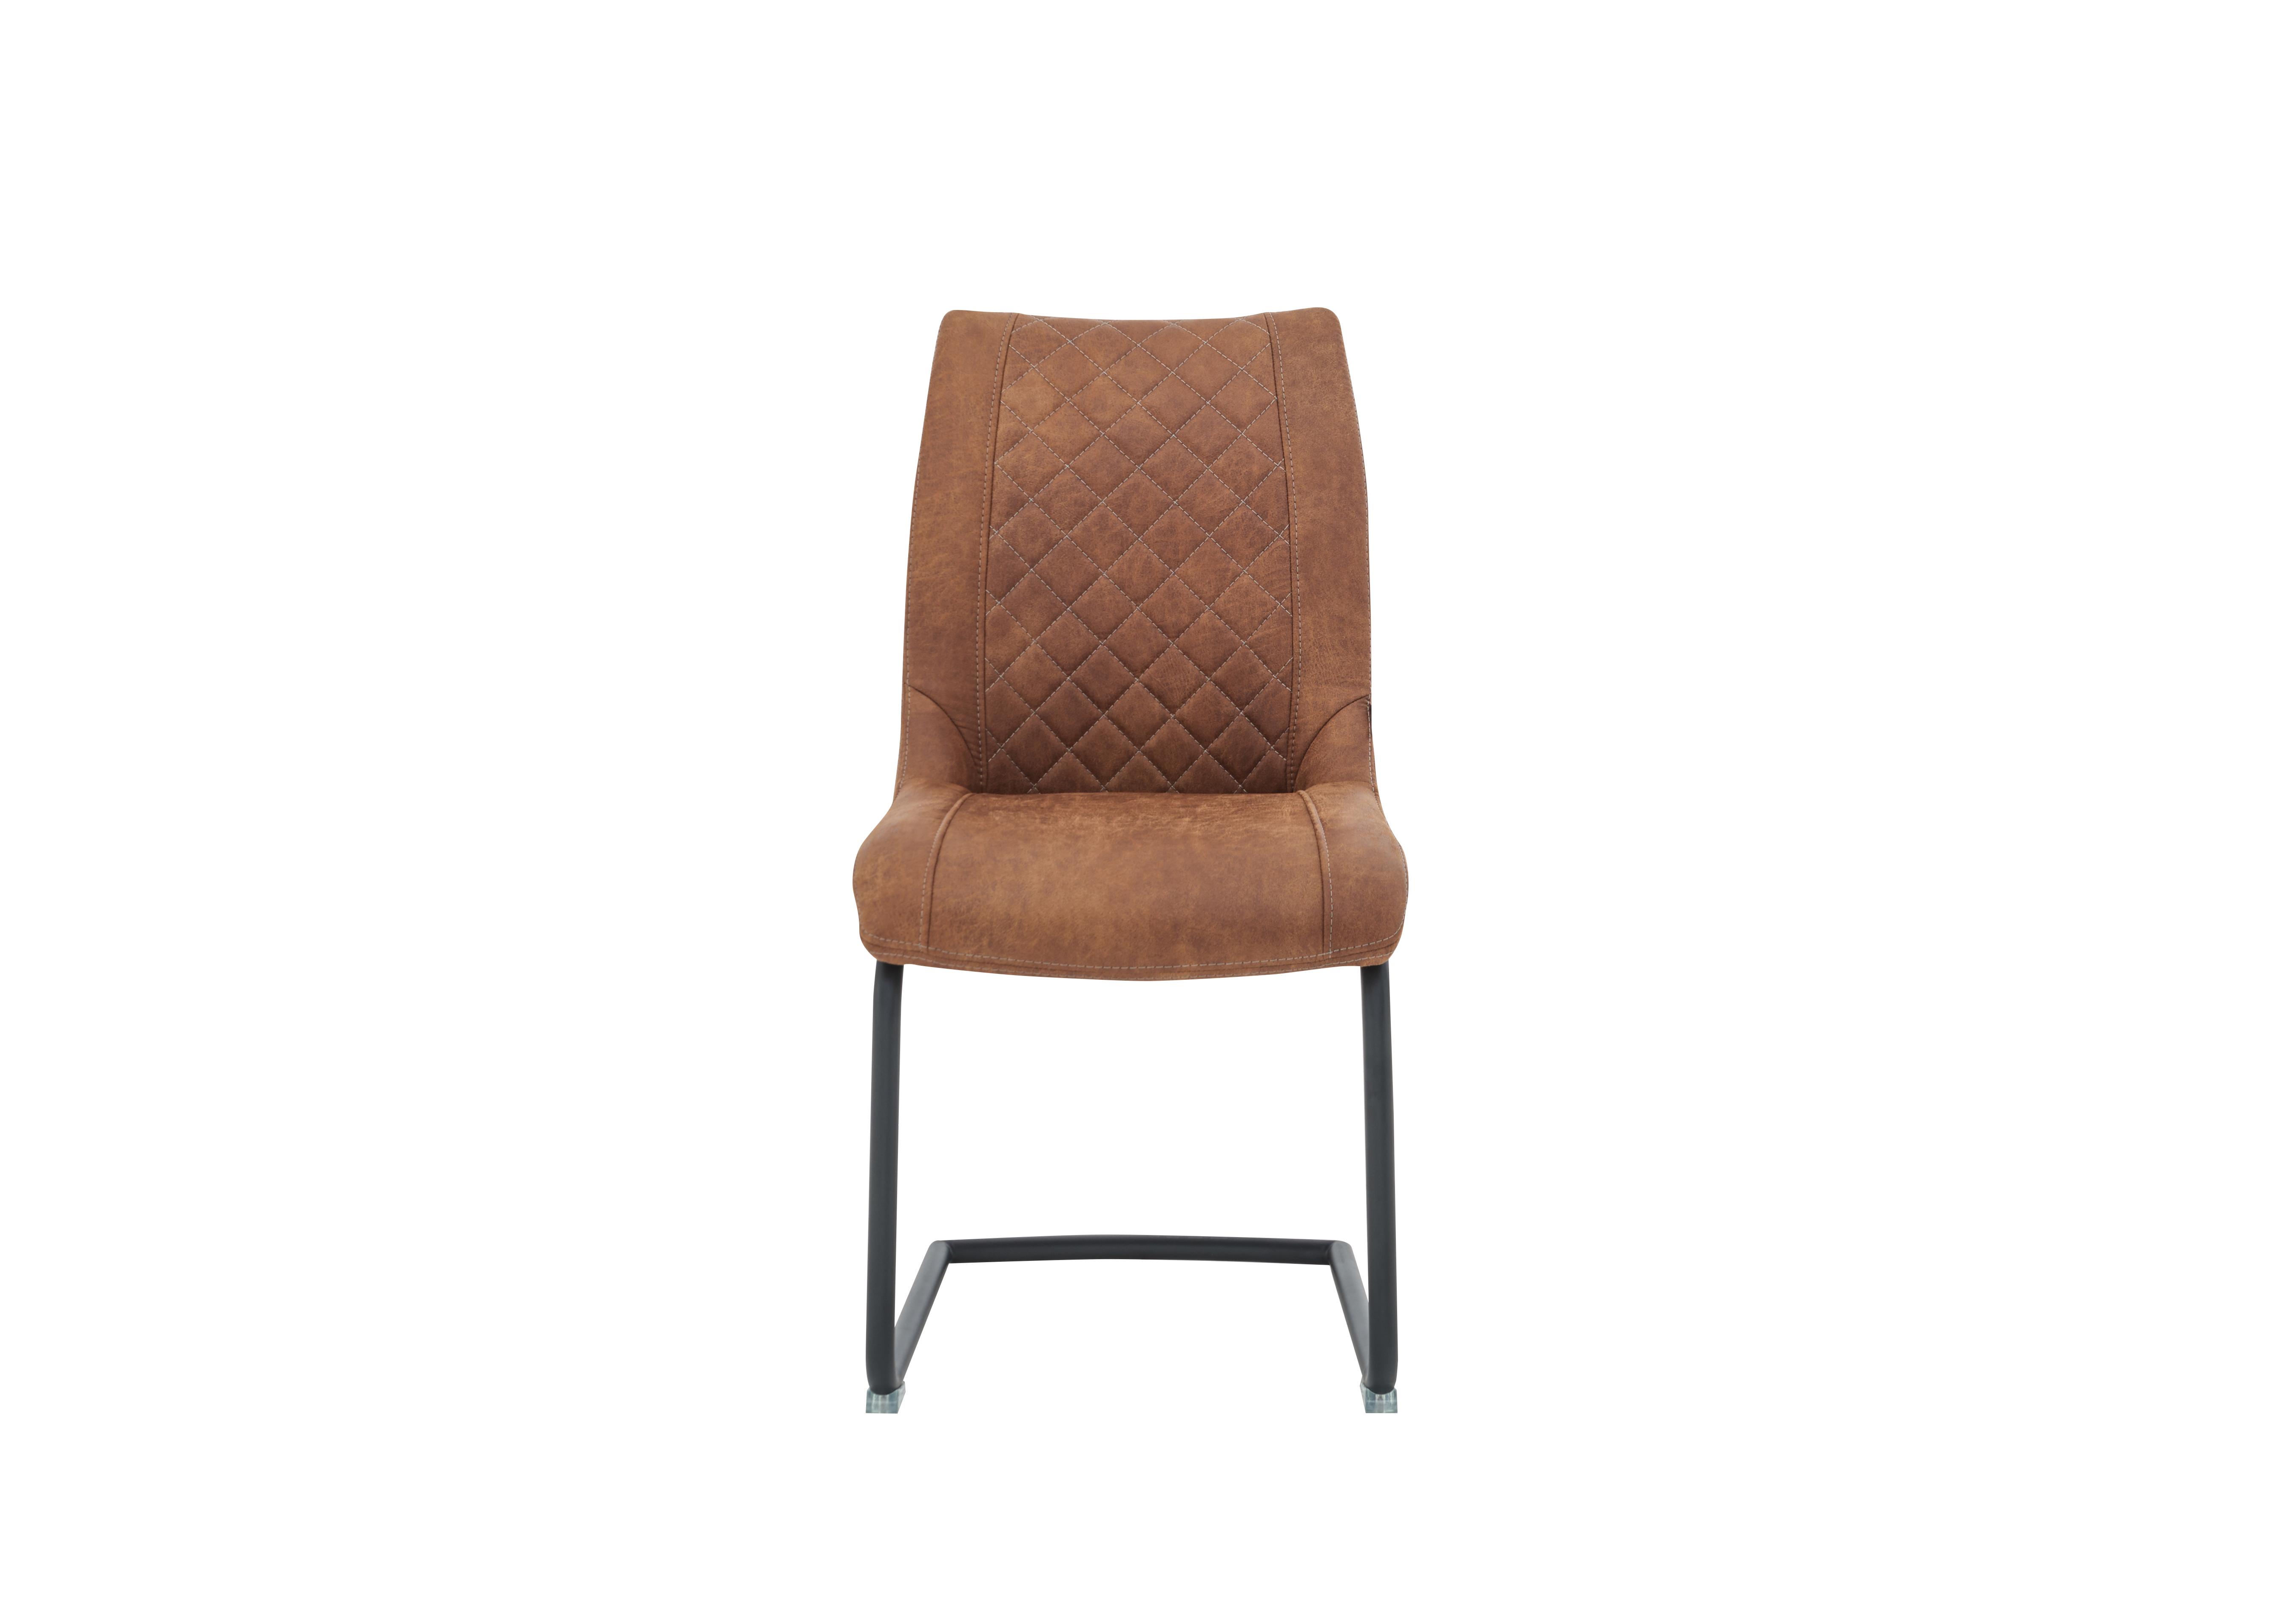 Baltimore Dining Chair in Cognac on Furniture Village